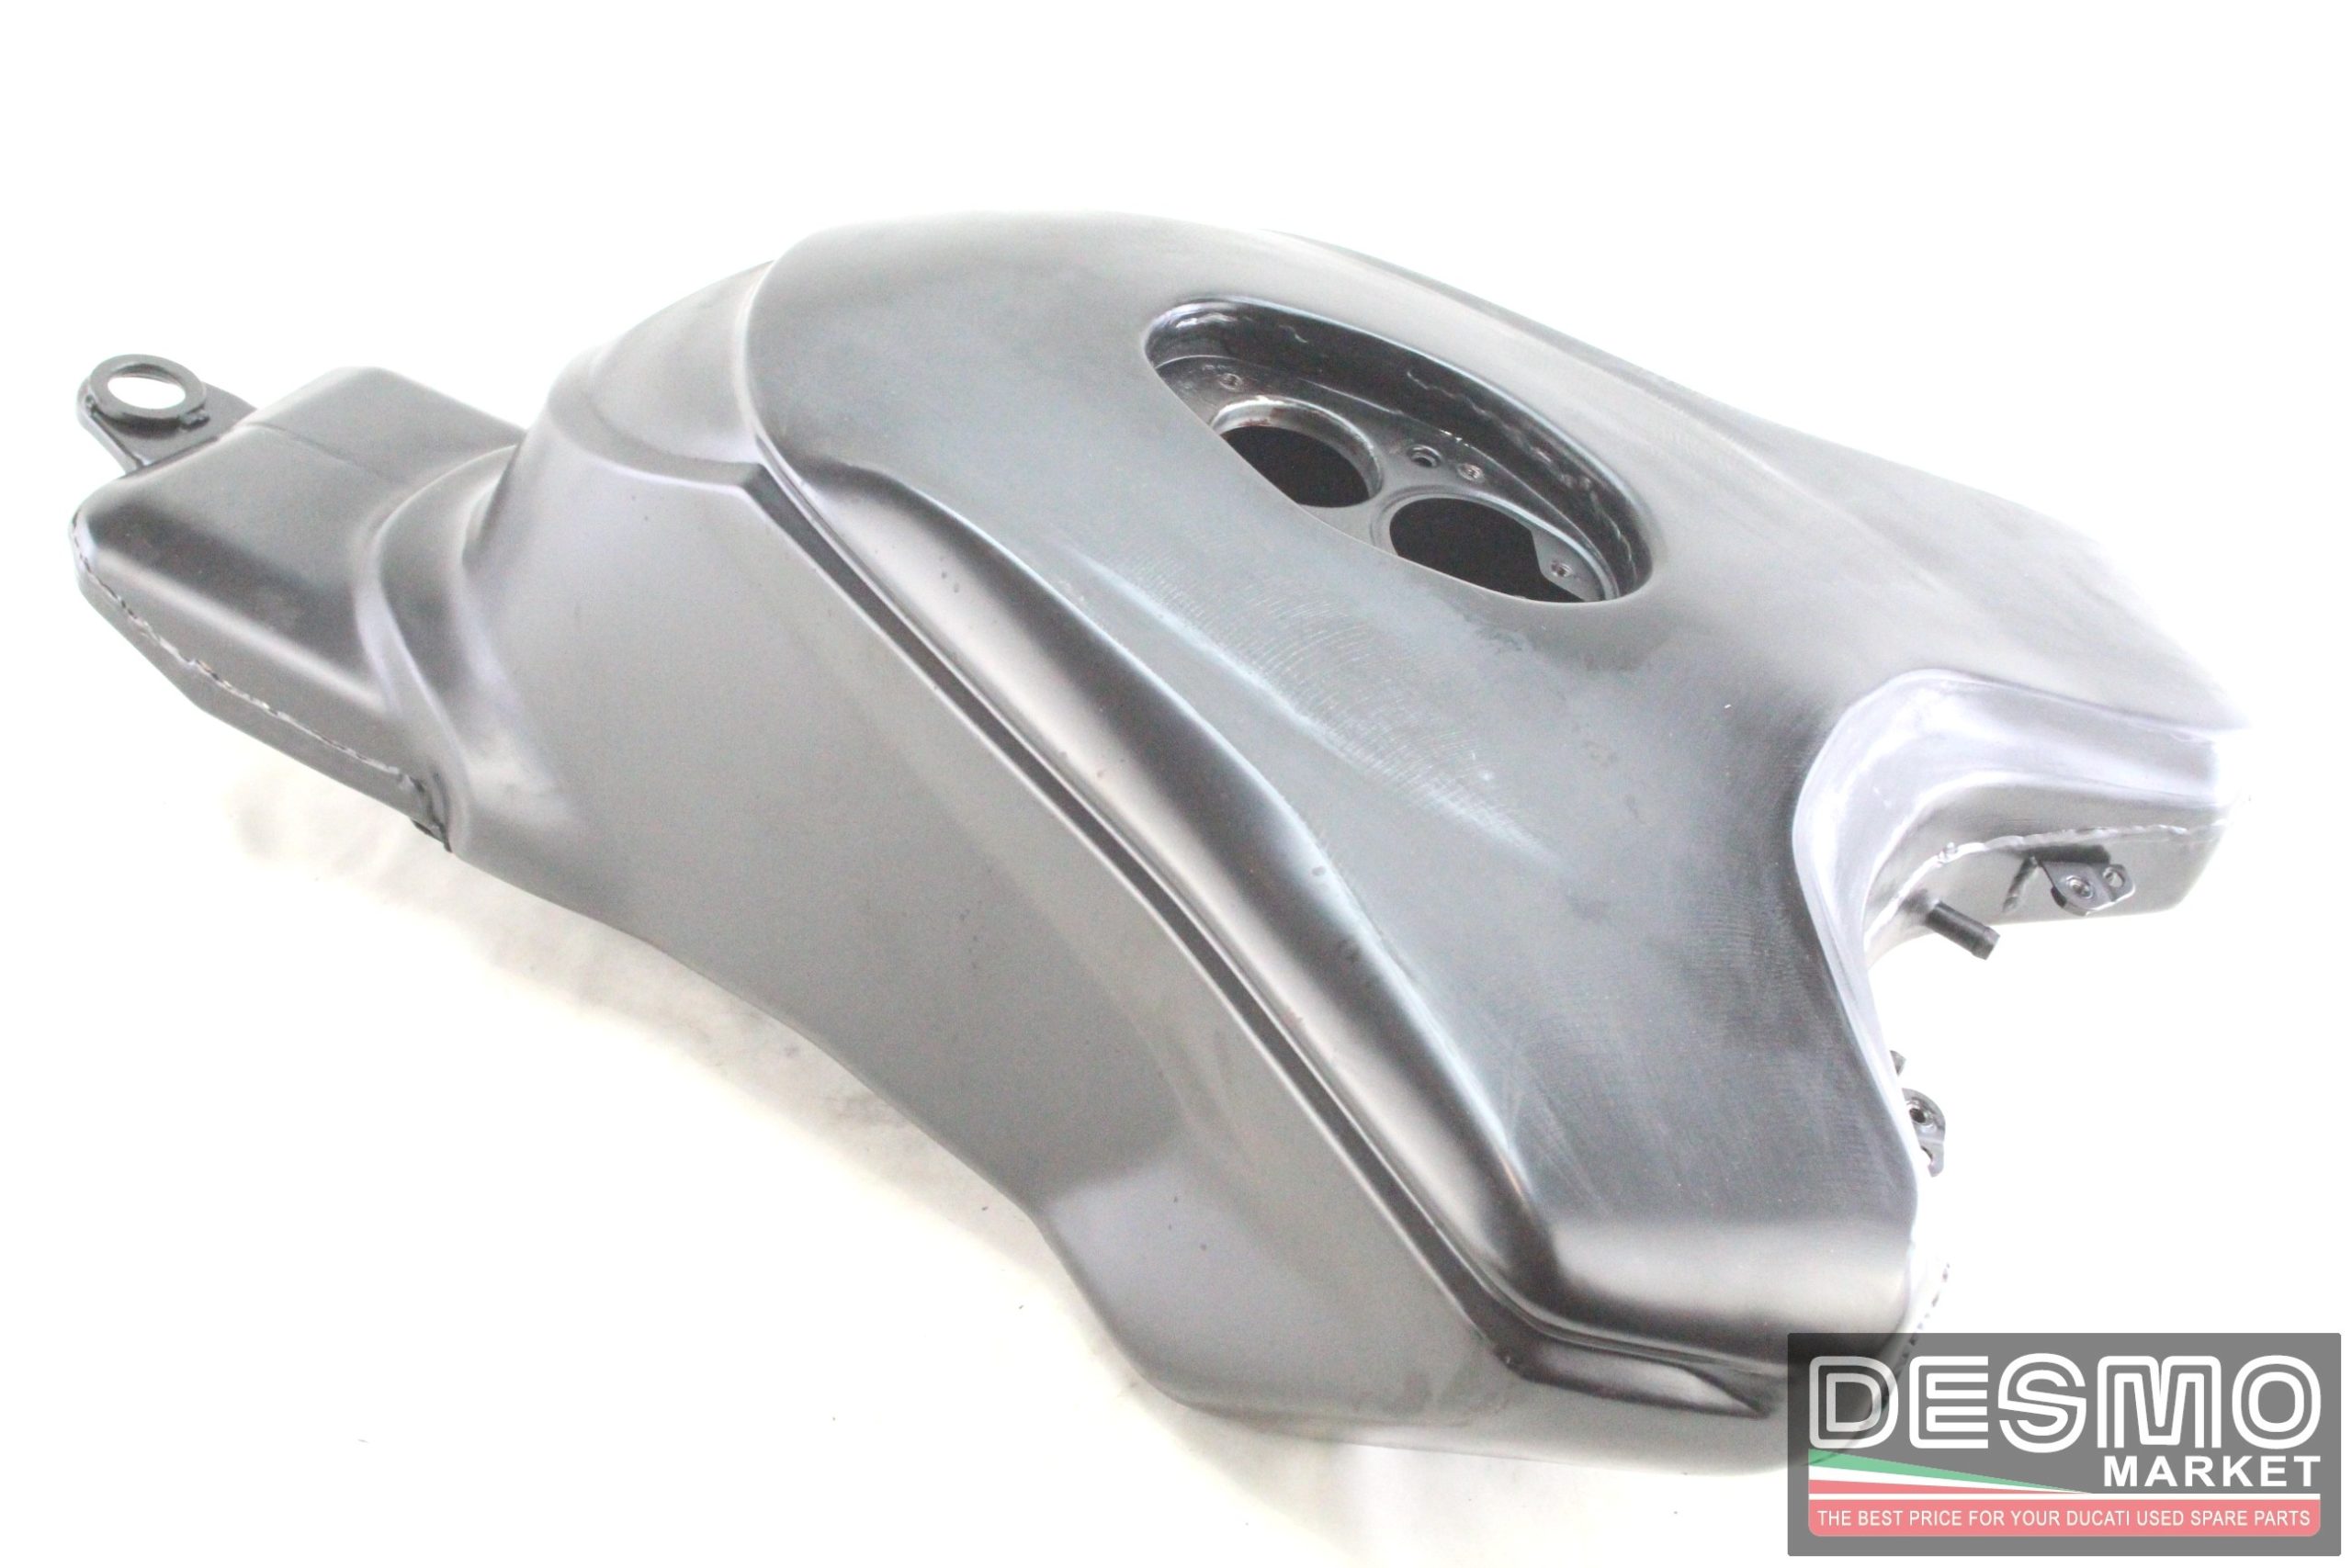 18％OFF】 Gas Tank DUCATI 999 RSファクトリーレーシング燃料タンク Ducati Corse 真新しい RS Factory  Racing Fuel Tank, Corse, BRAND NEW